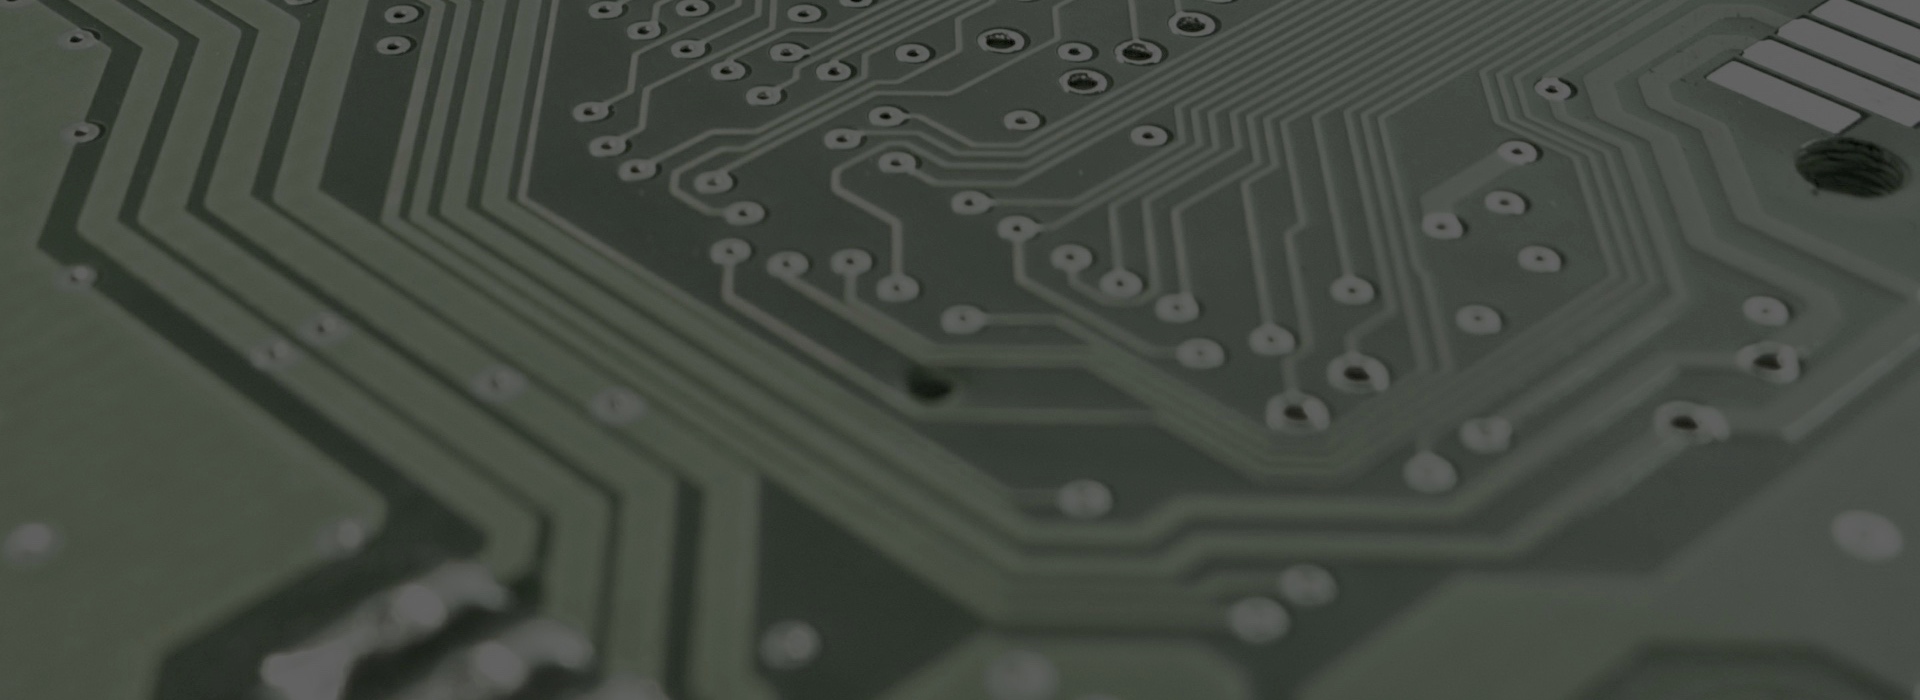 Background carousel image of circuit board.